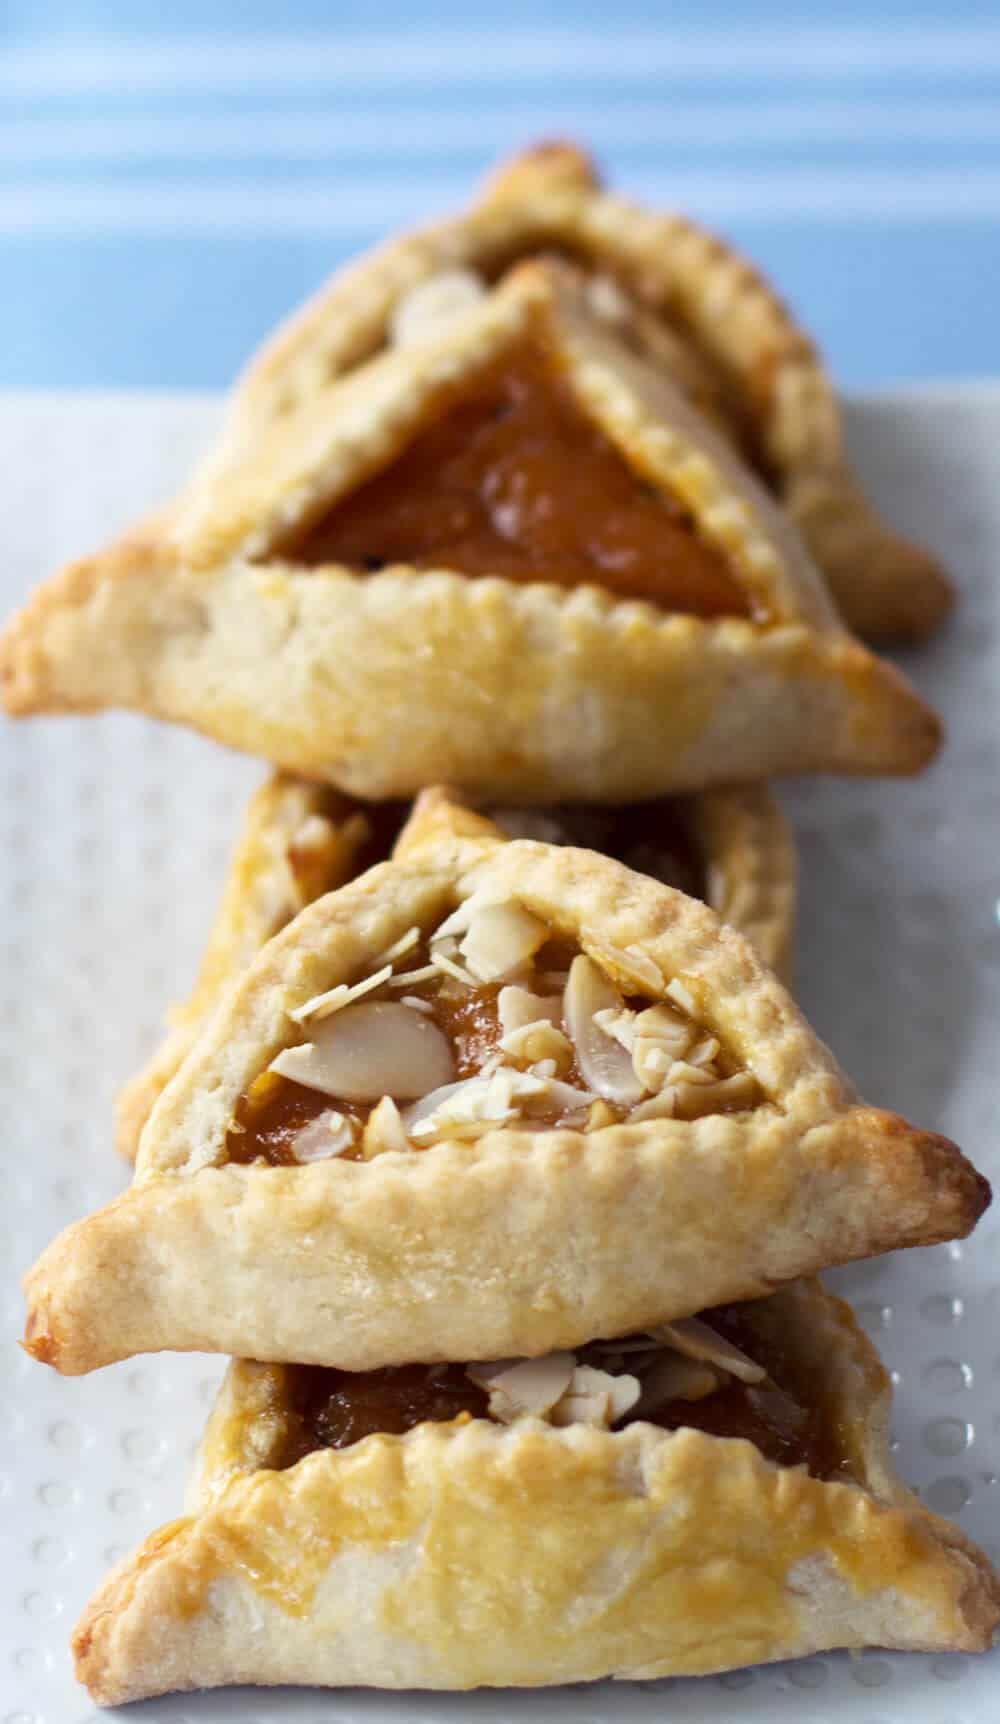 Apricot hamantaschen are a treat for Purim or anytime you want an easy, delicious, fruit-filled cookie | Mother Would Know